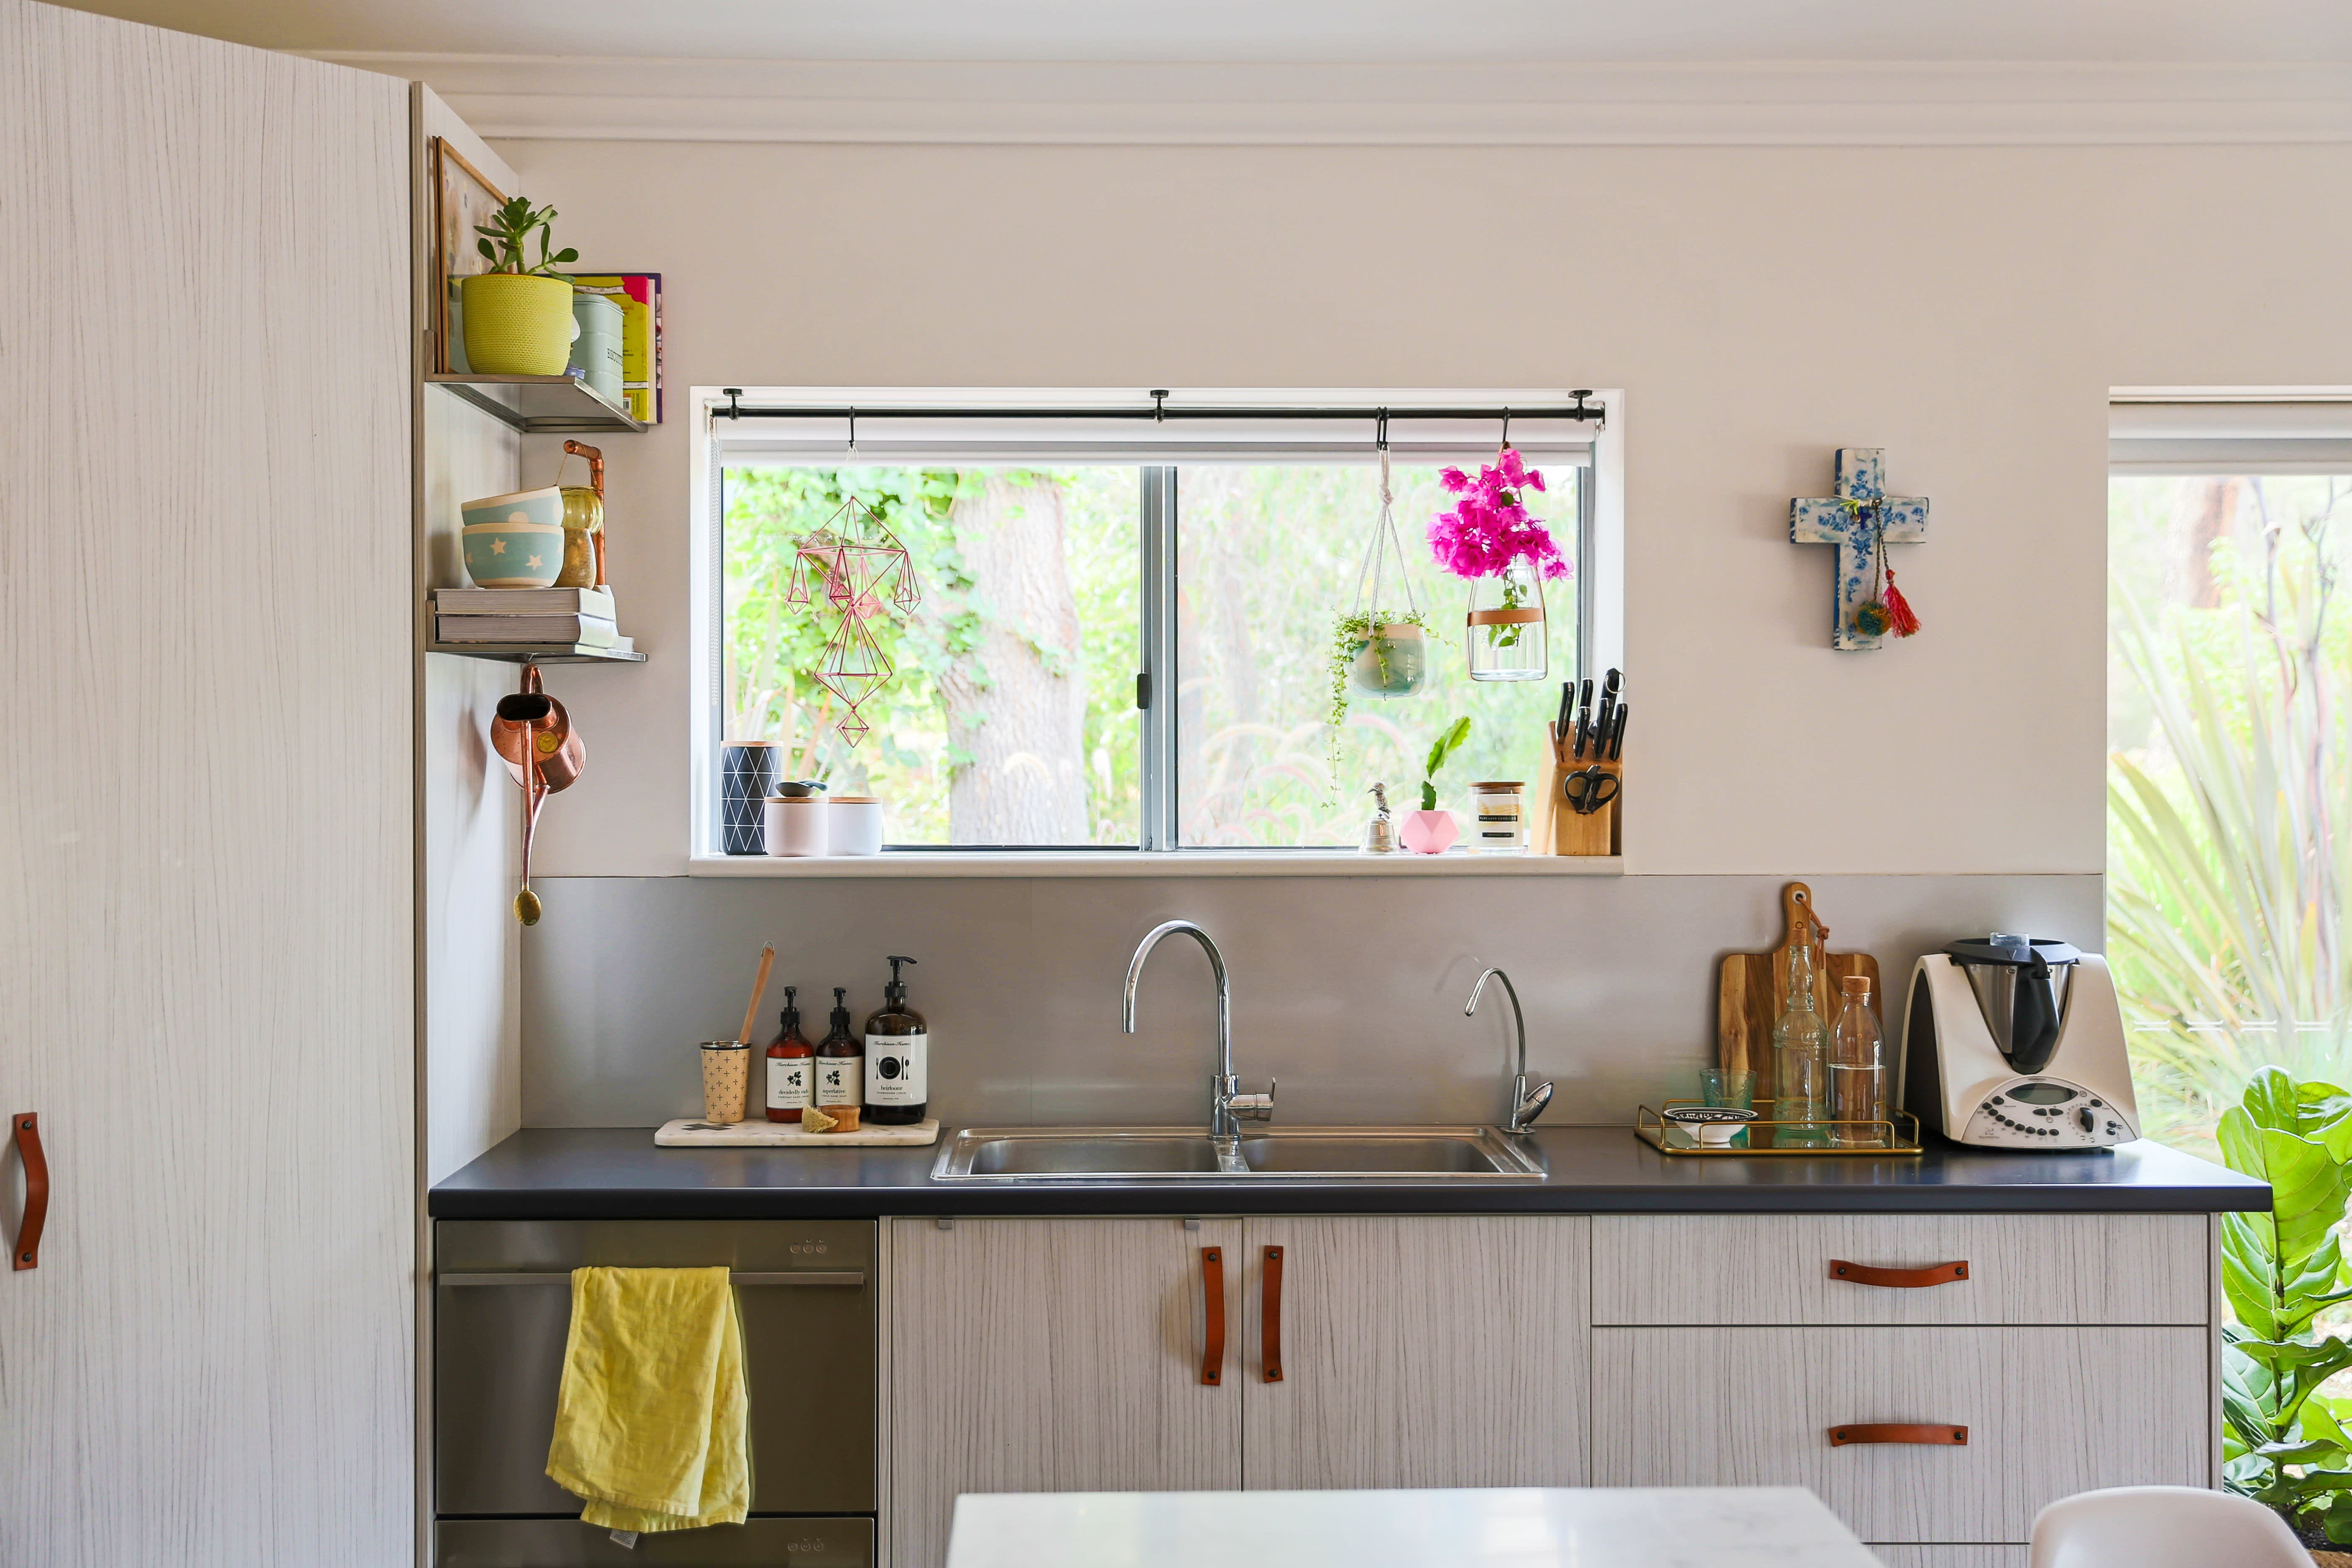 Should You Marie Kondo Your Kitchen This Summer? | Kitchn